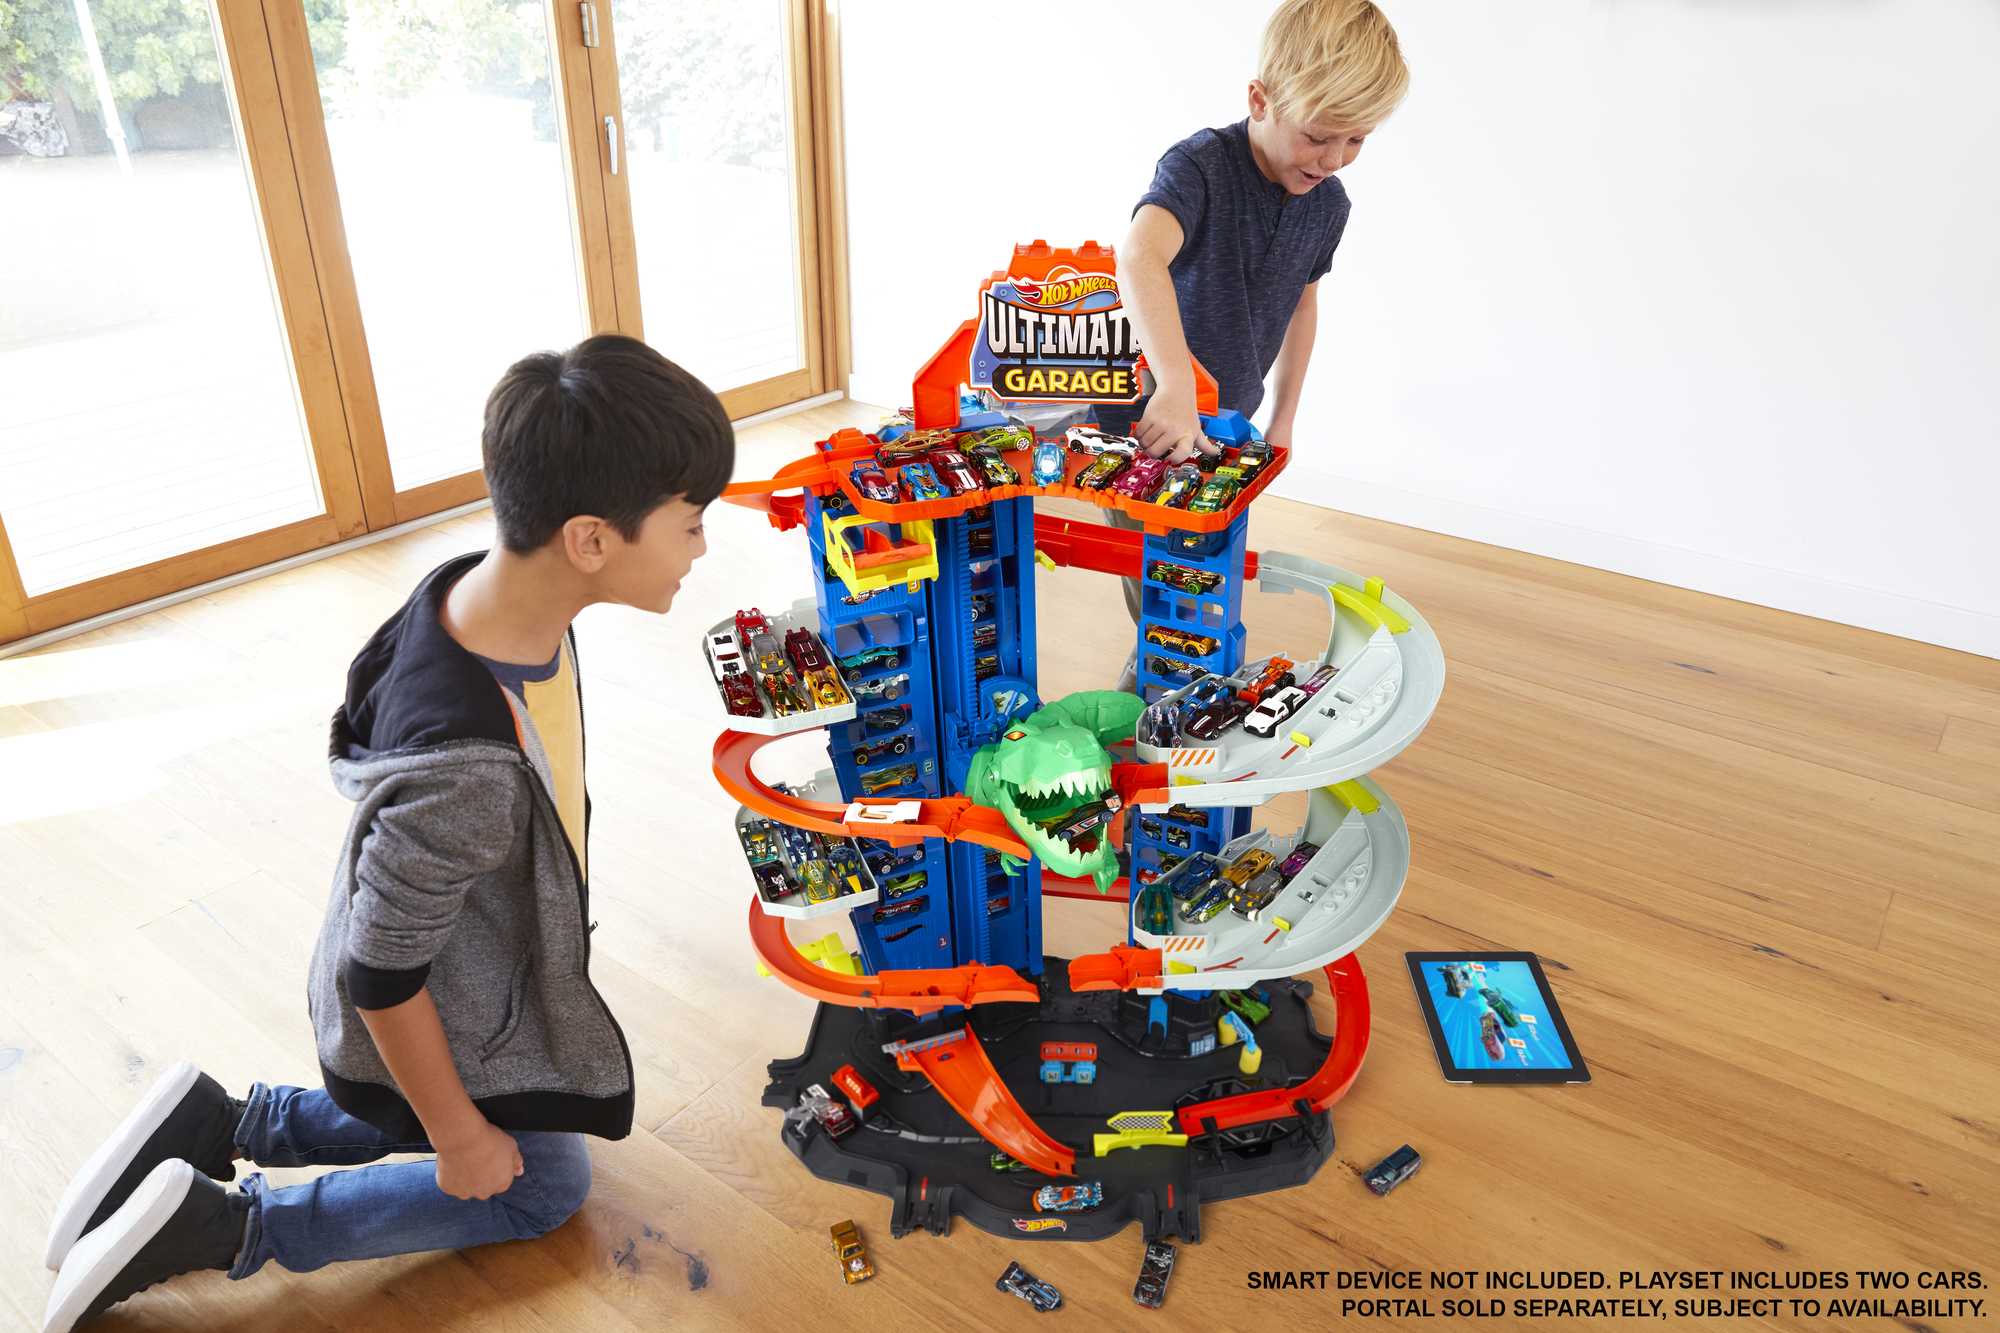 Hot Wheels Ultimate Garage Playset And Accessories - Shop Playsets